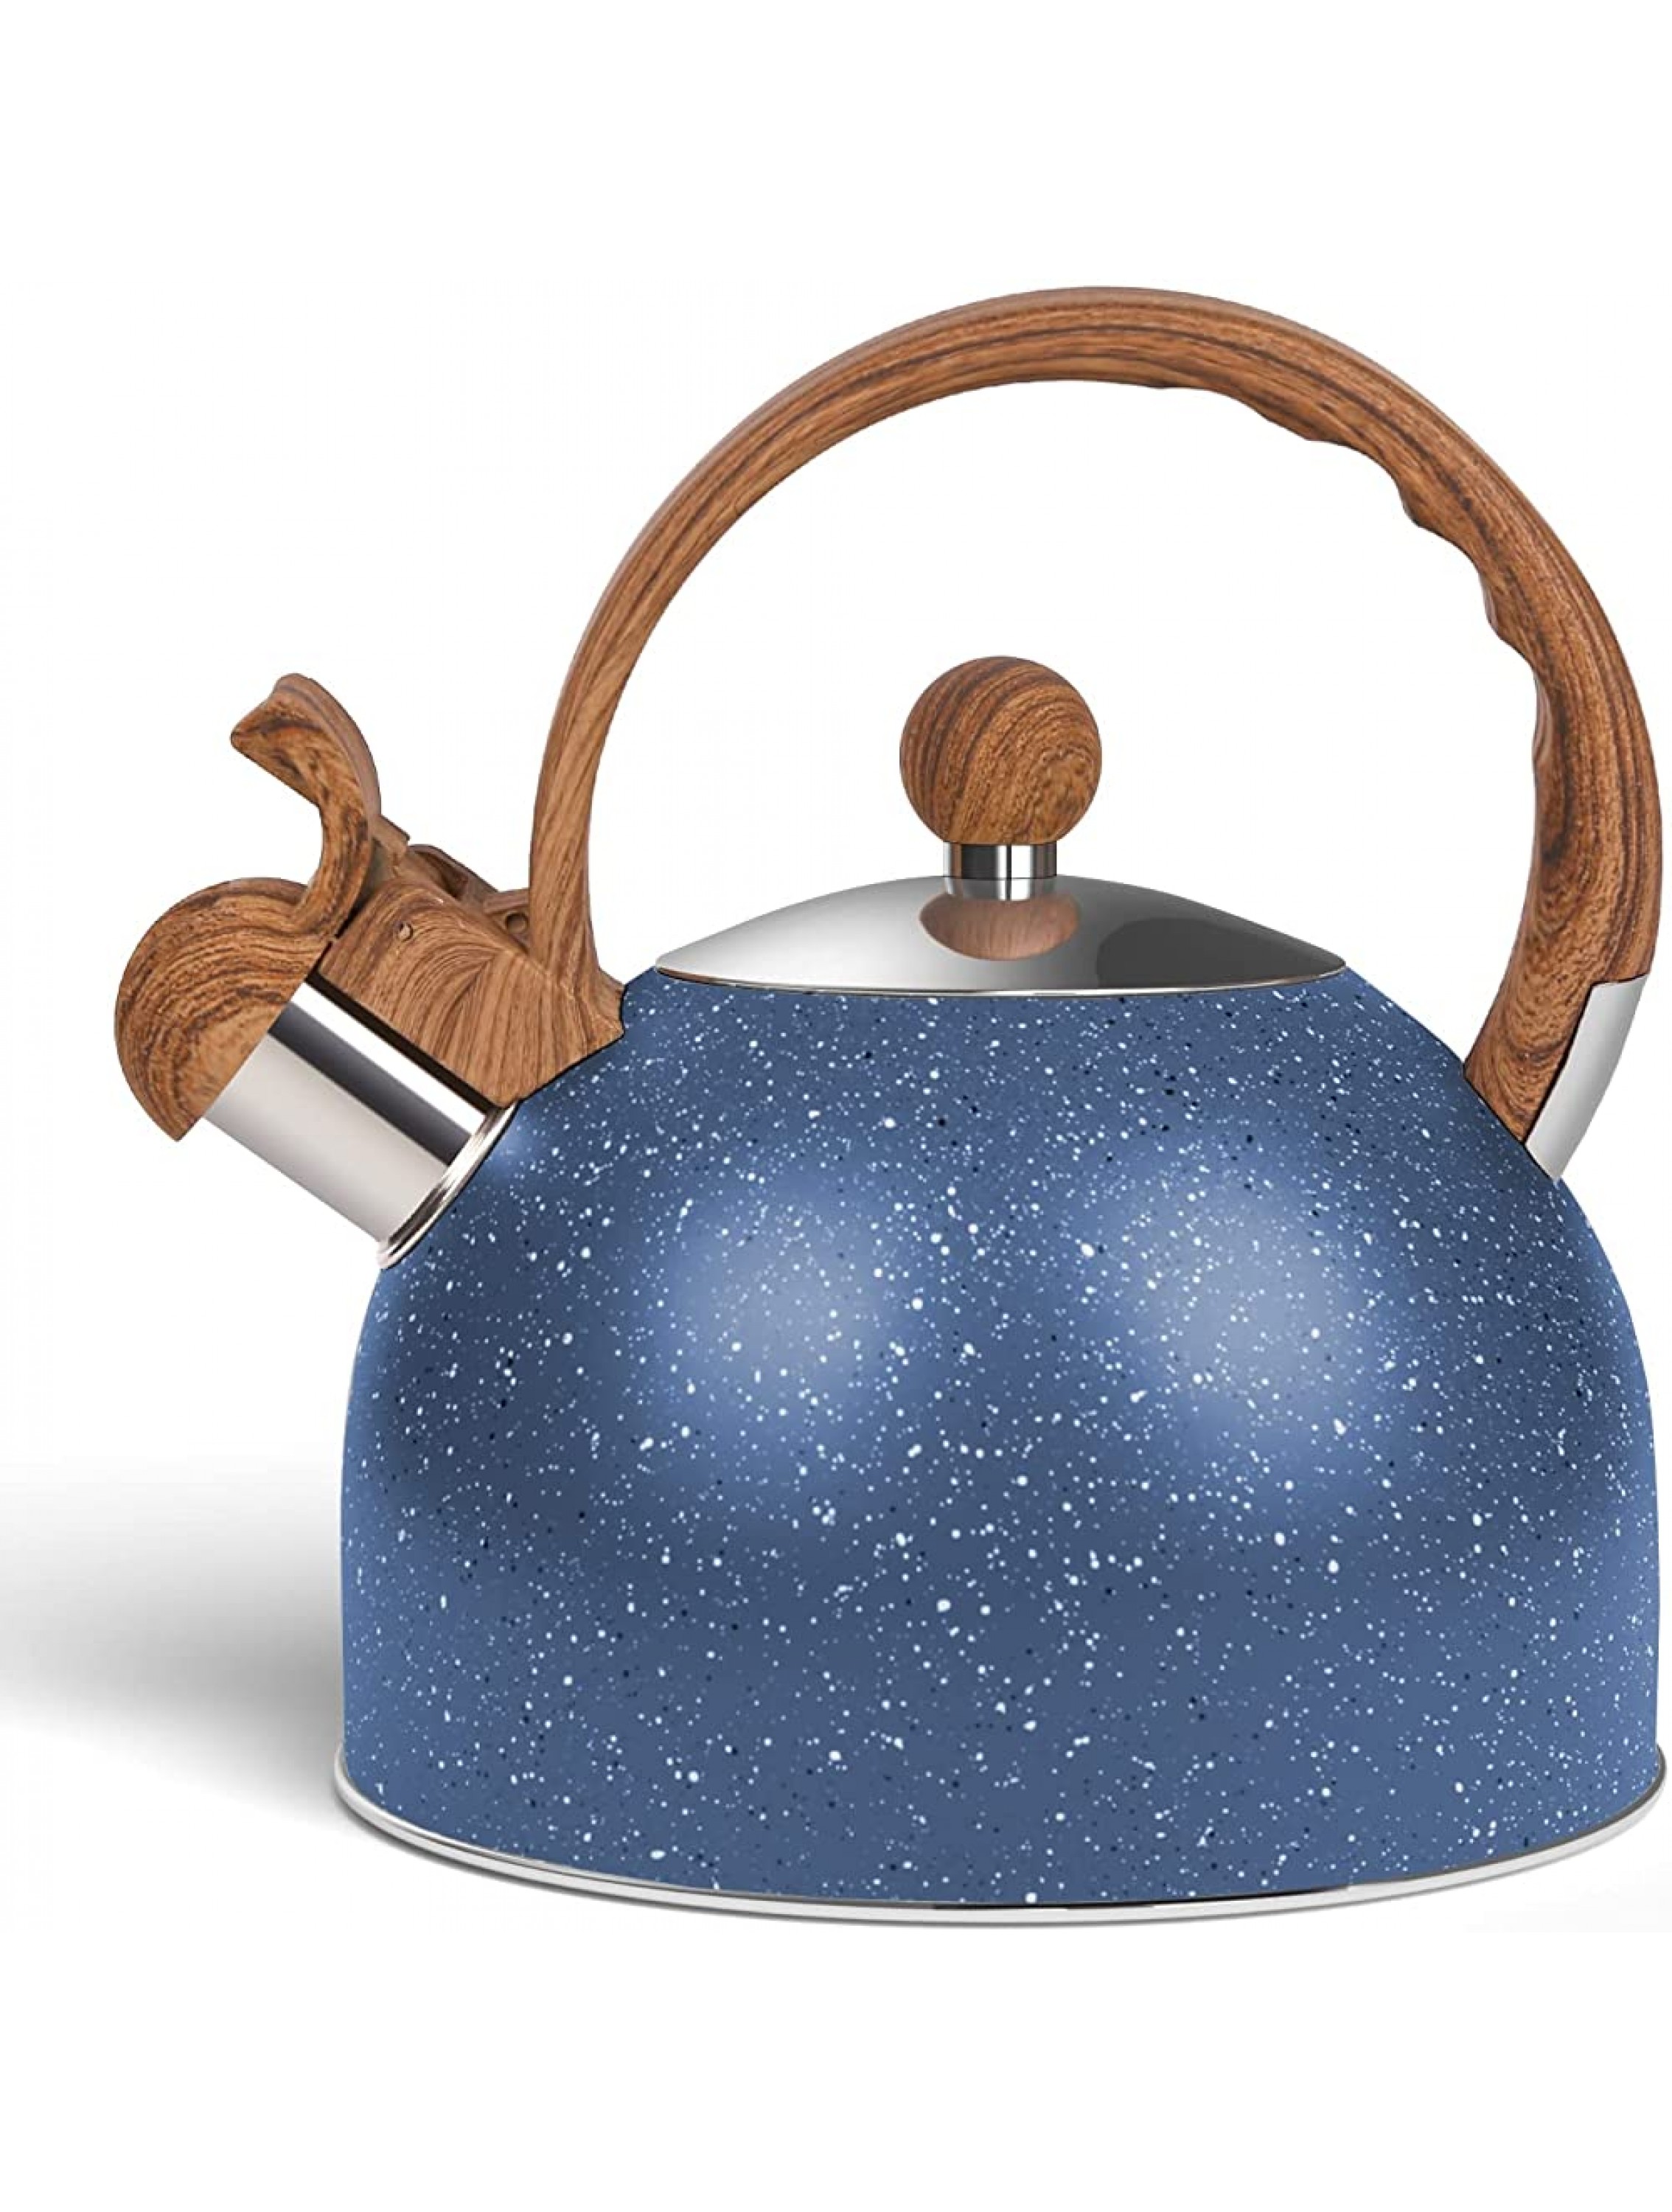 Awvlvwa Tea Kettle for Stovetop 2.5 Quart Stainless Water Teapot Boilers for Stovetops Induction Stone Kettle with Loud Whistle Perfect for Preparing Hot Water Fast for Coffee Tea Sky Blue - BRRNAPDPM